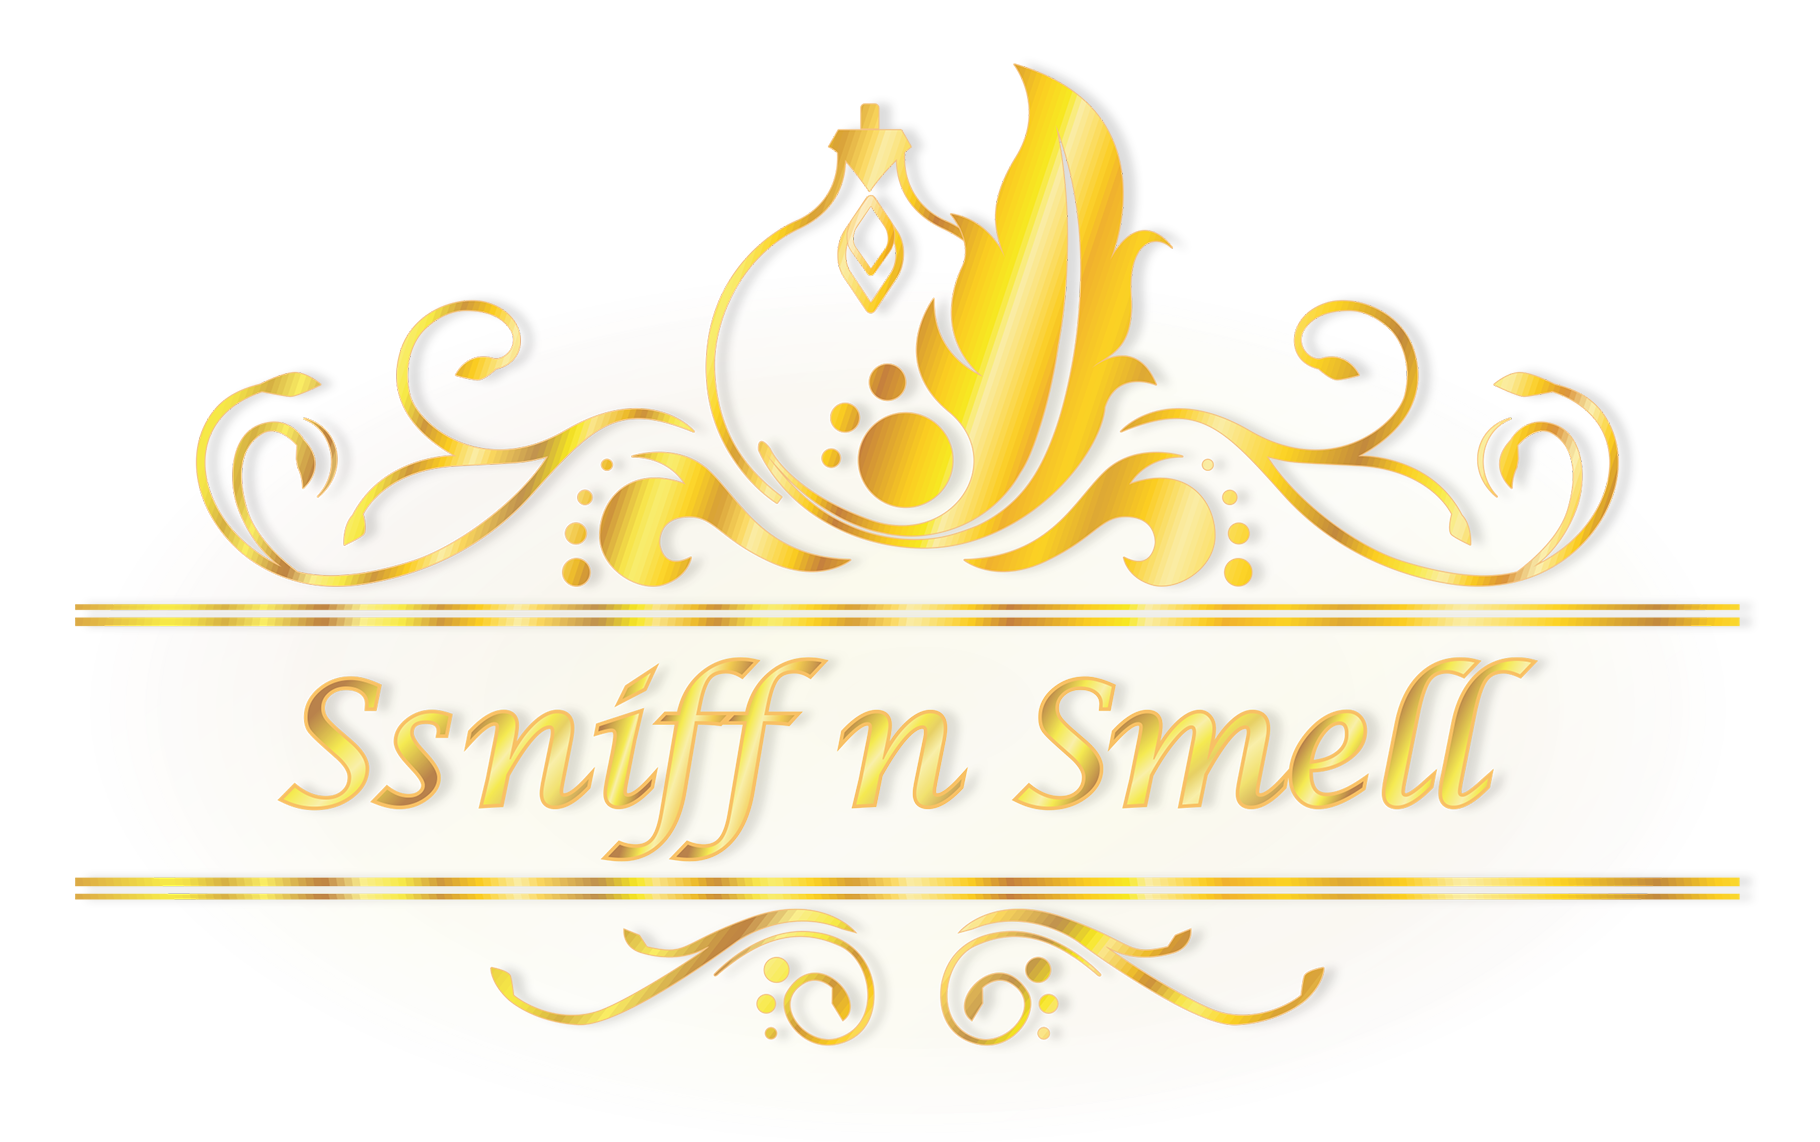 SSNIFF N SMELL